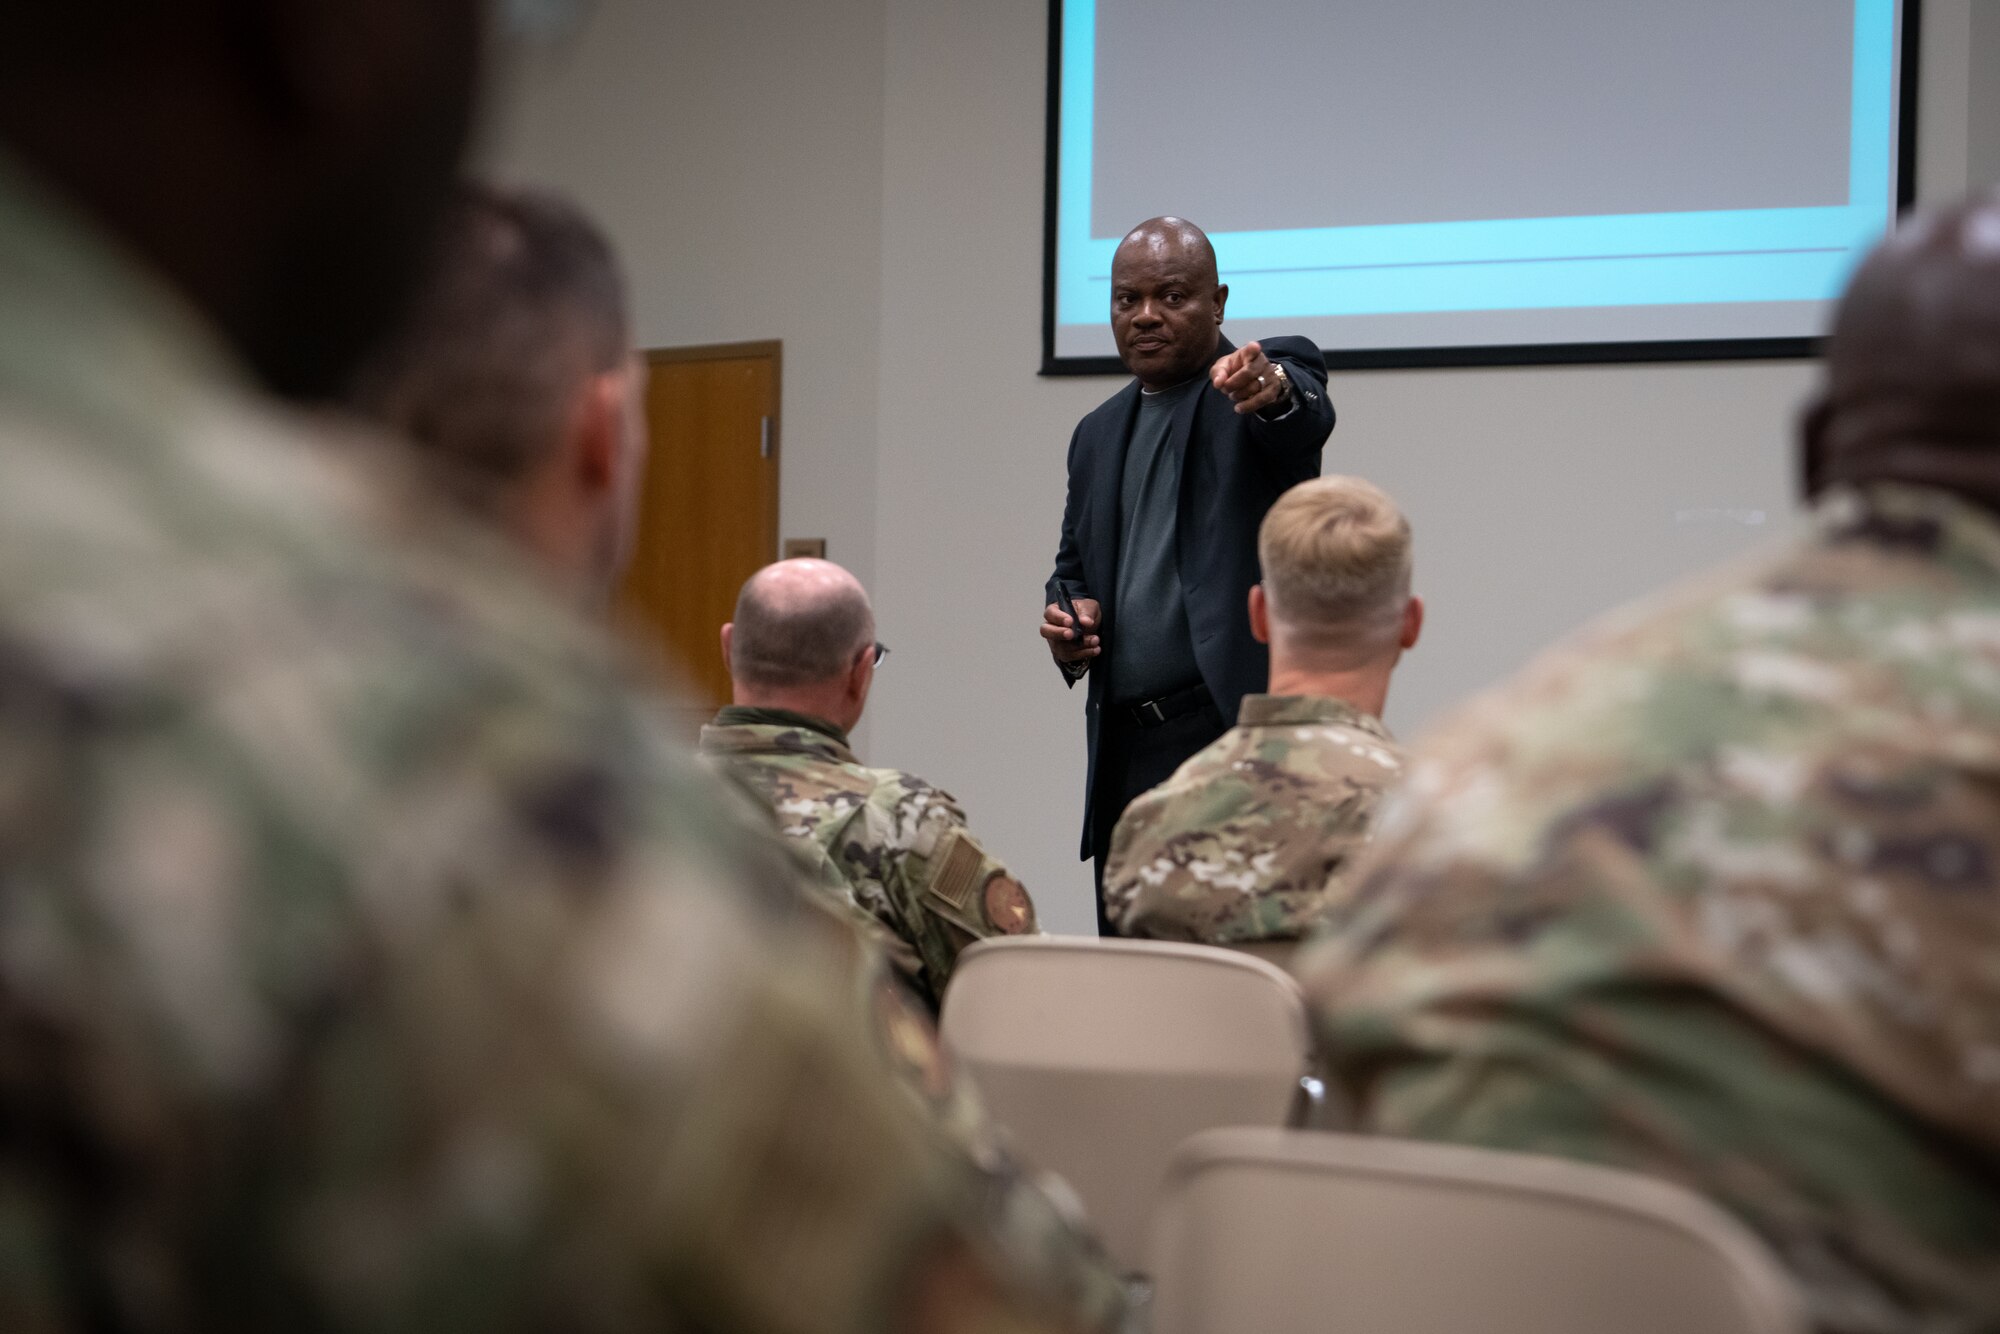 G. Lee Floyd, Air Force Reserve Command's Chief Diversity and Inclusion Officer, speaks to members of the 403rd Wing during a Cross-Cultural Diversity and Inclusion training at Keesler Air Force Base, Miss., June 6, 2021. The training is mandatory for all Air and Space Force individuals. (U.S. Air Force photo by Staff Sgt. Shelton Sherrill)